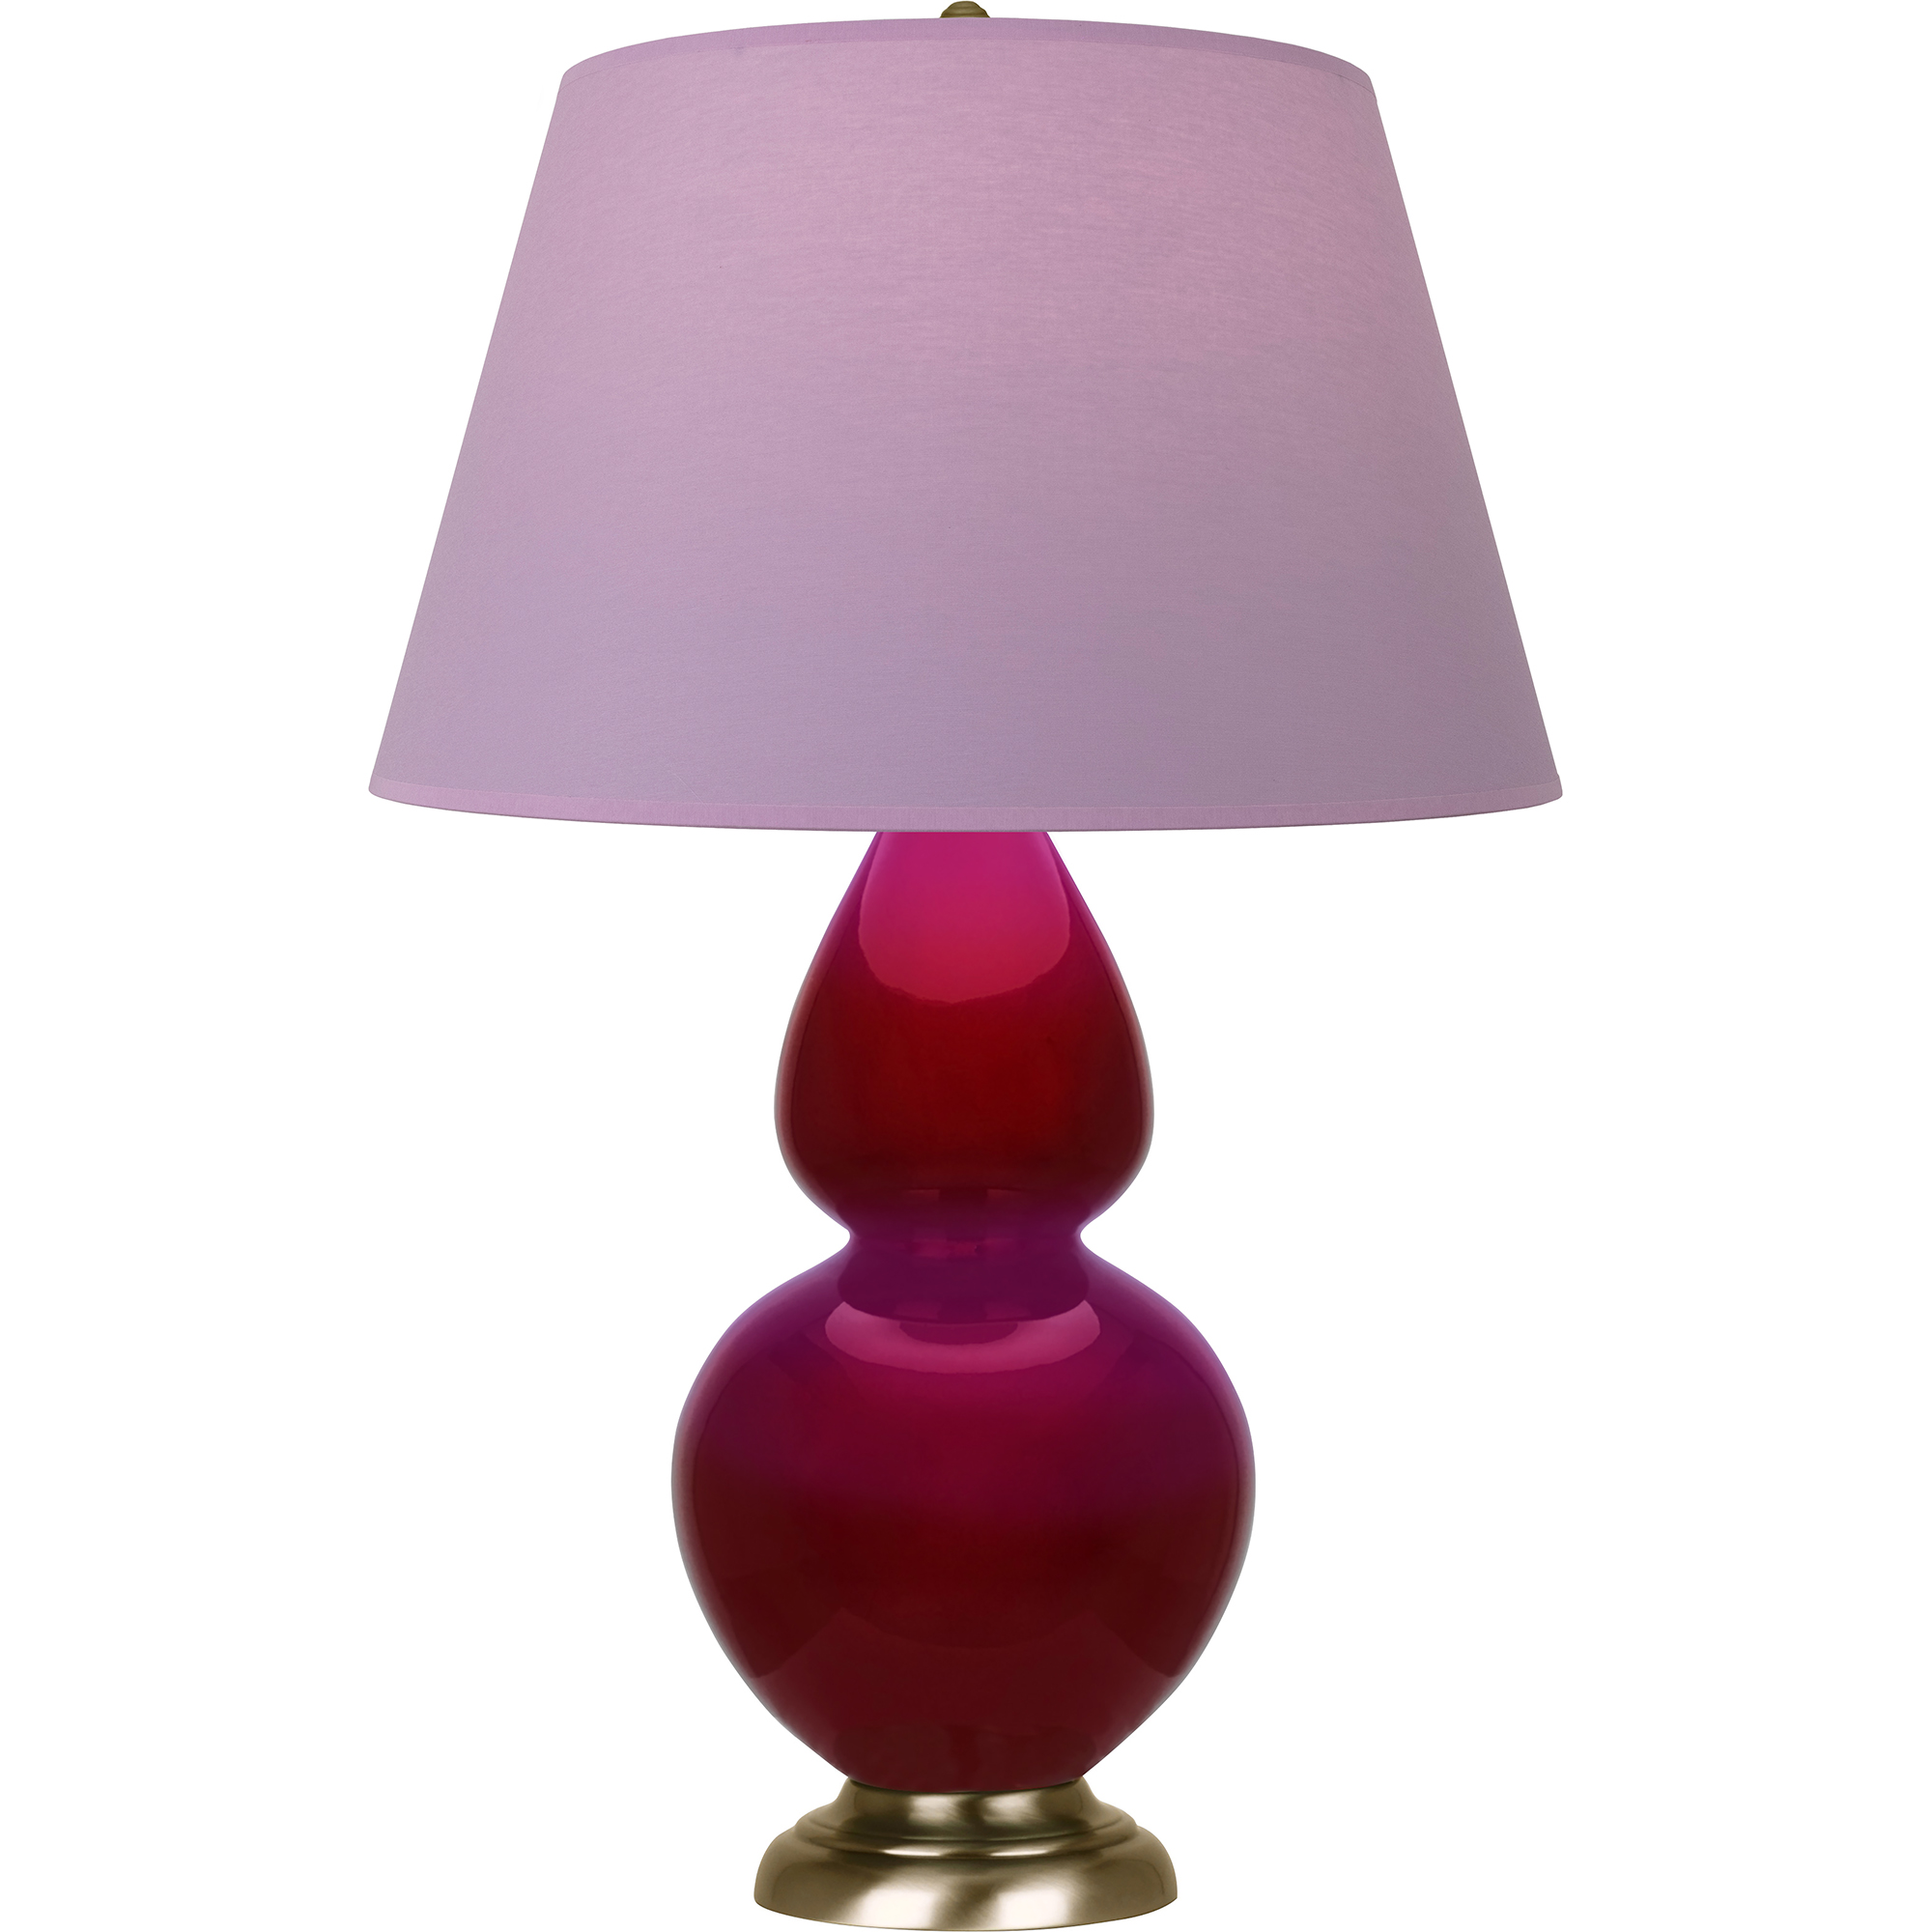 Double Gourd Table Lamp Style #SA20L